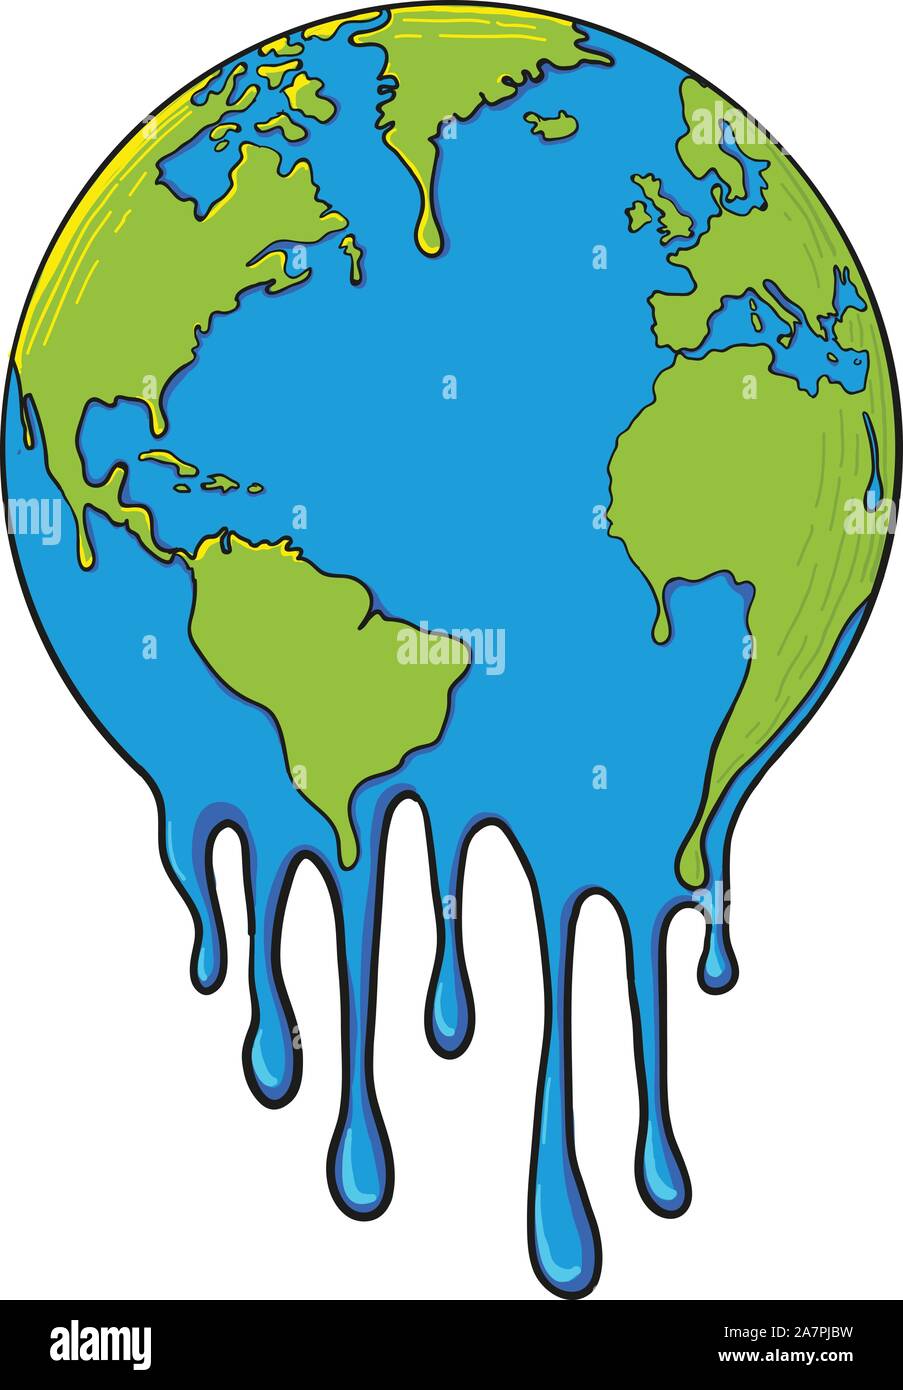 Global Warming and Drought Concept Illustration with Melting of Earth Stock Vector